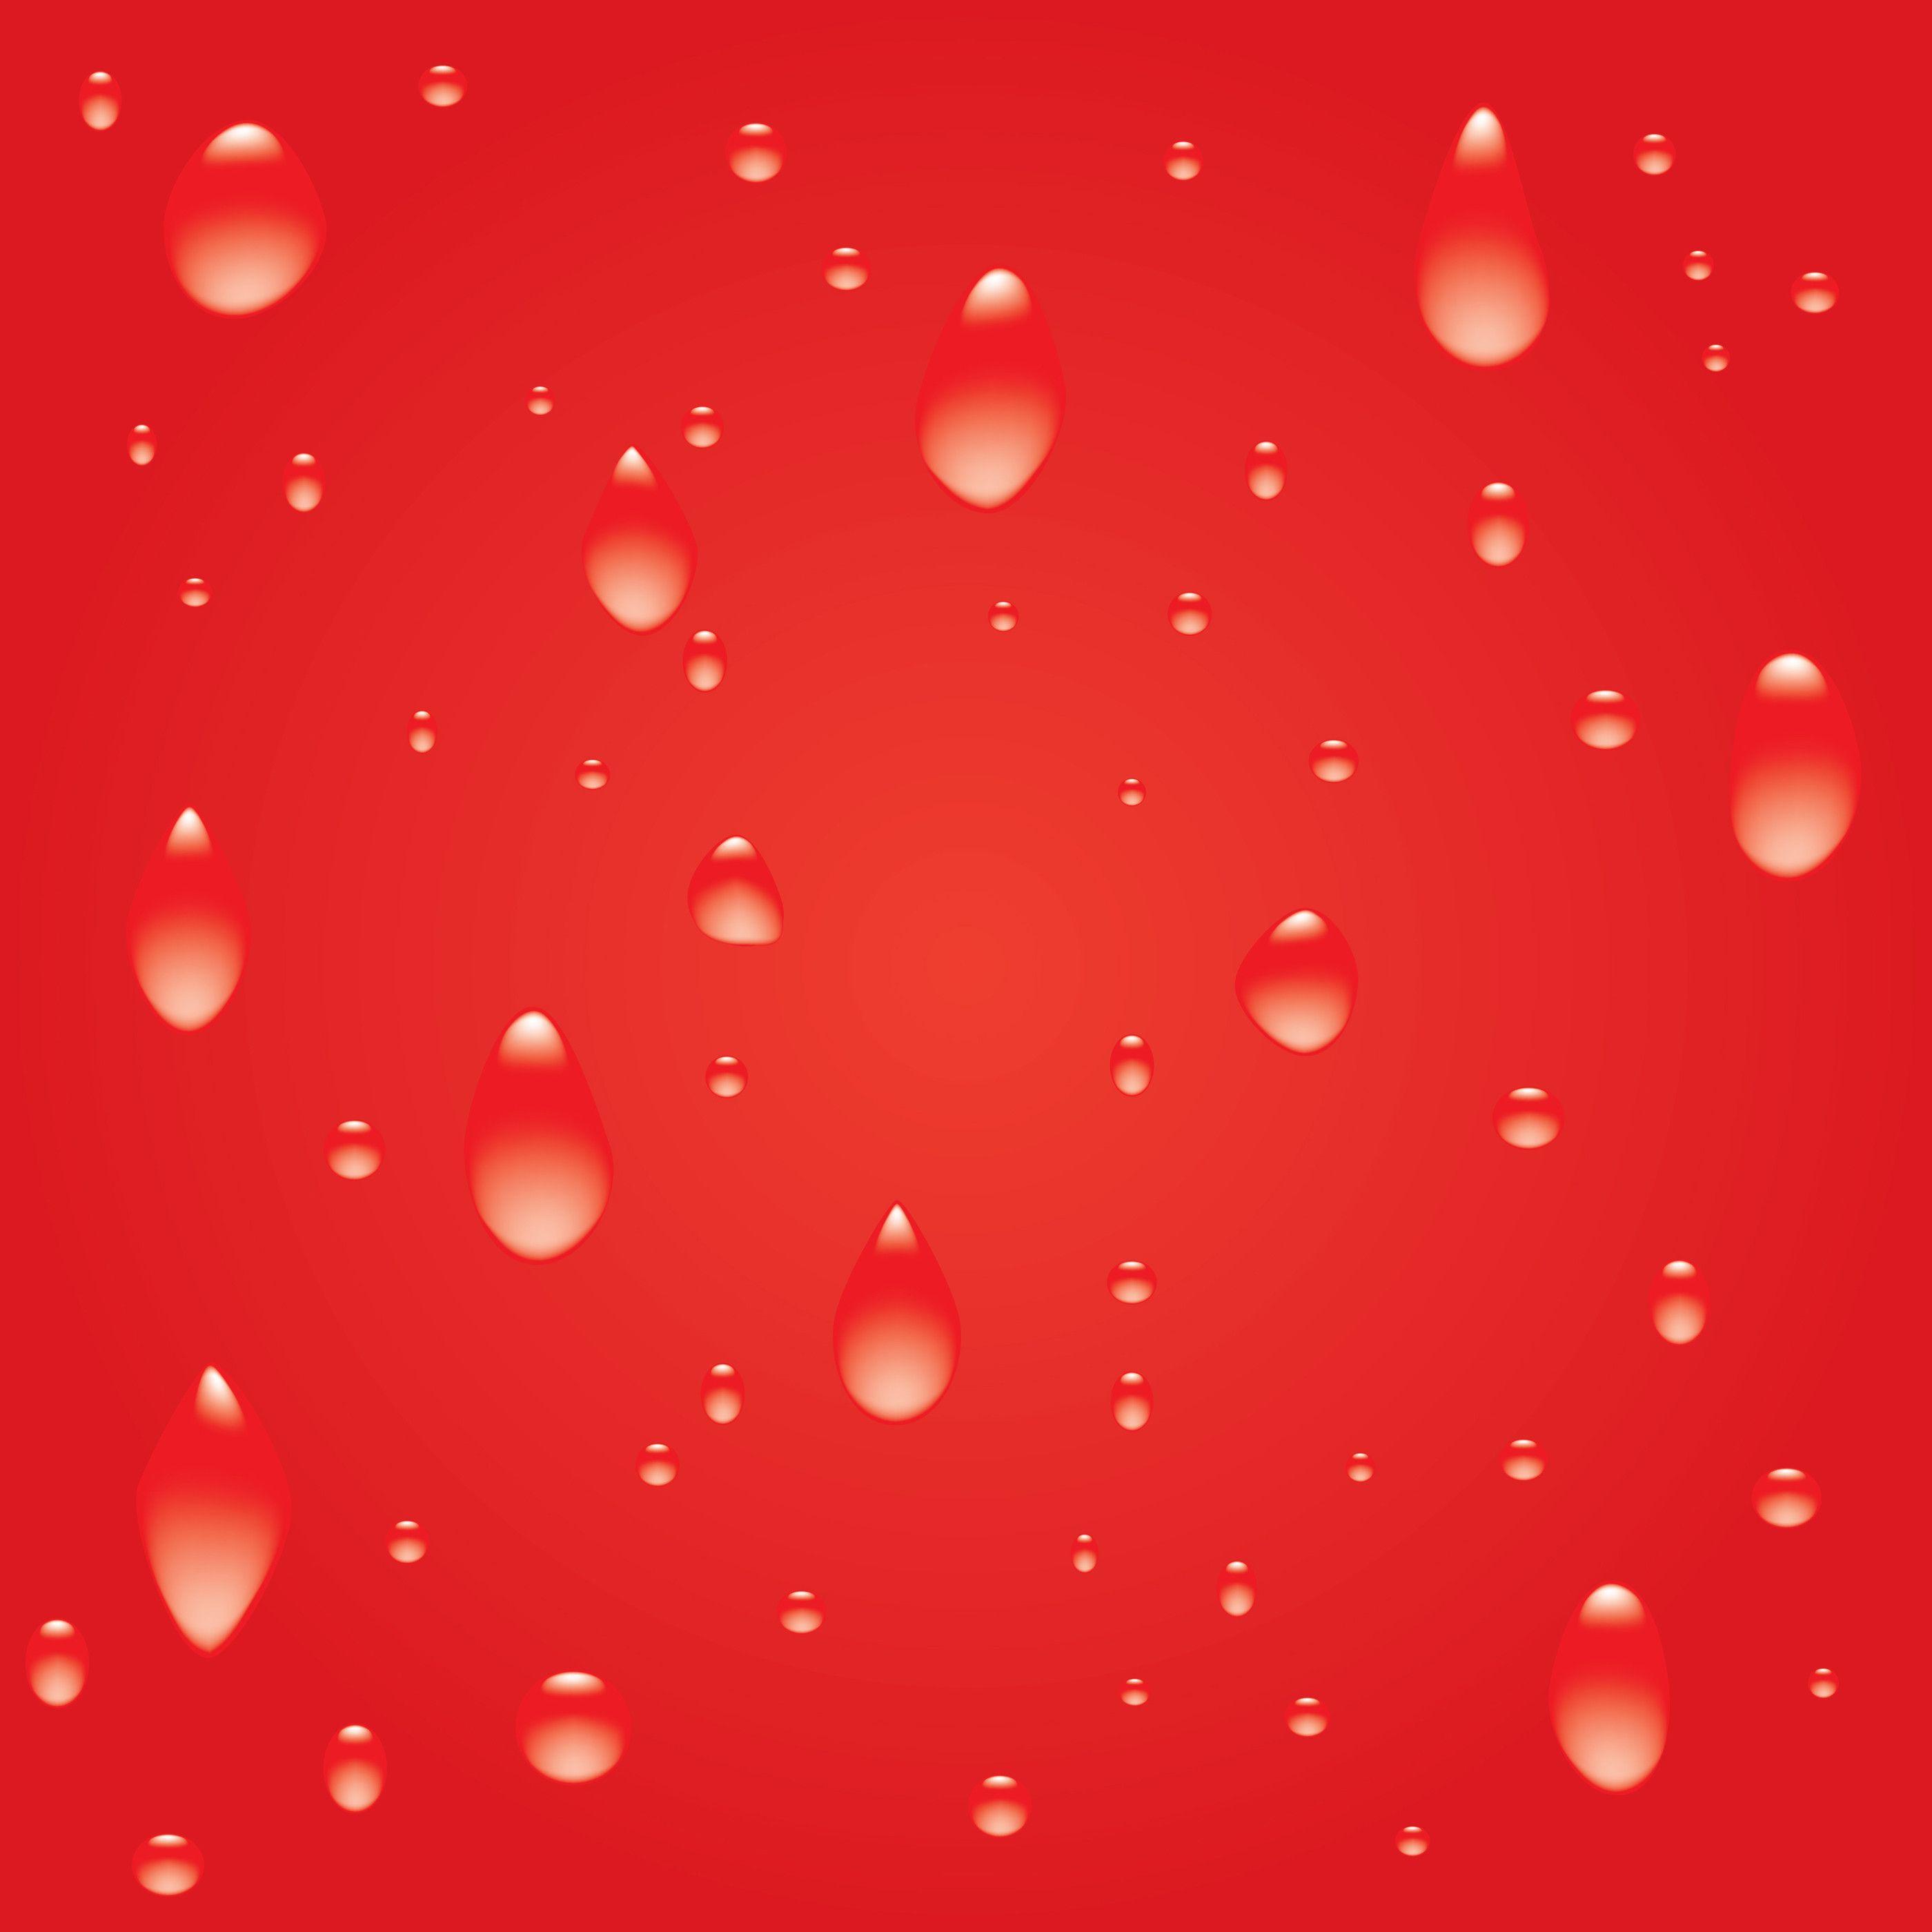 Society for Menstrual Cycle Research, Drops on red background